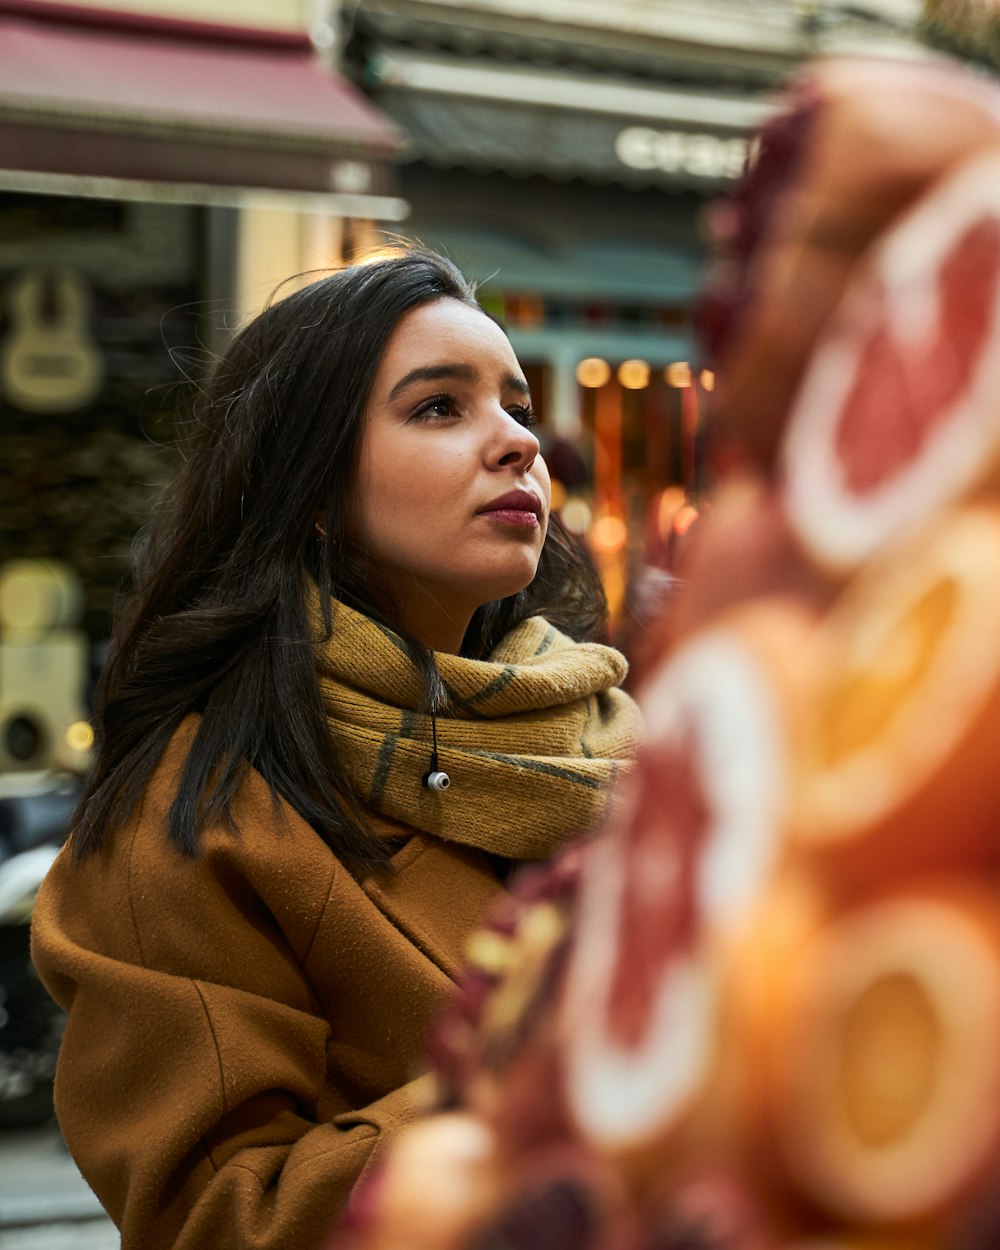 woman in brown scarf and brown coat standing near store during daytime